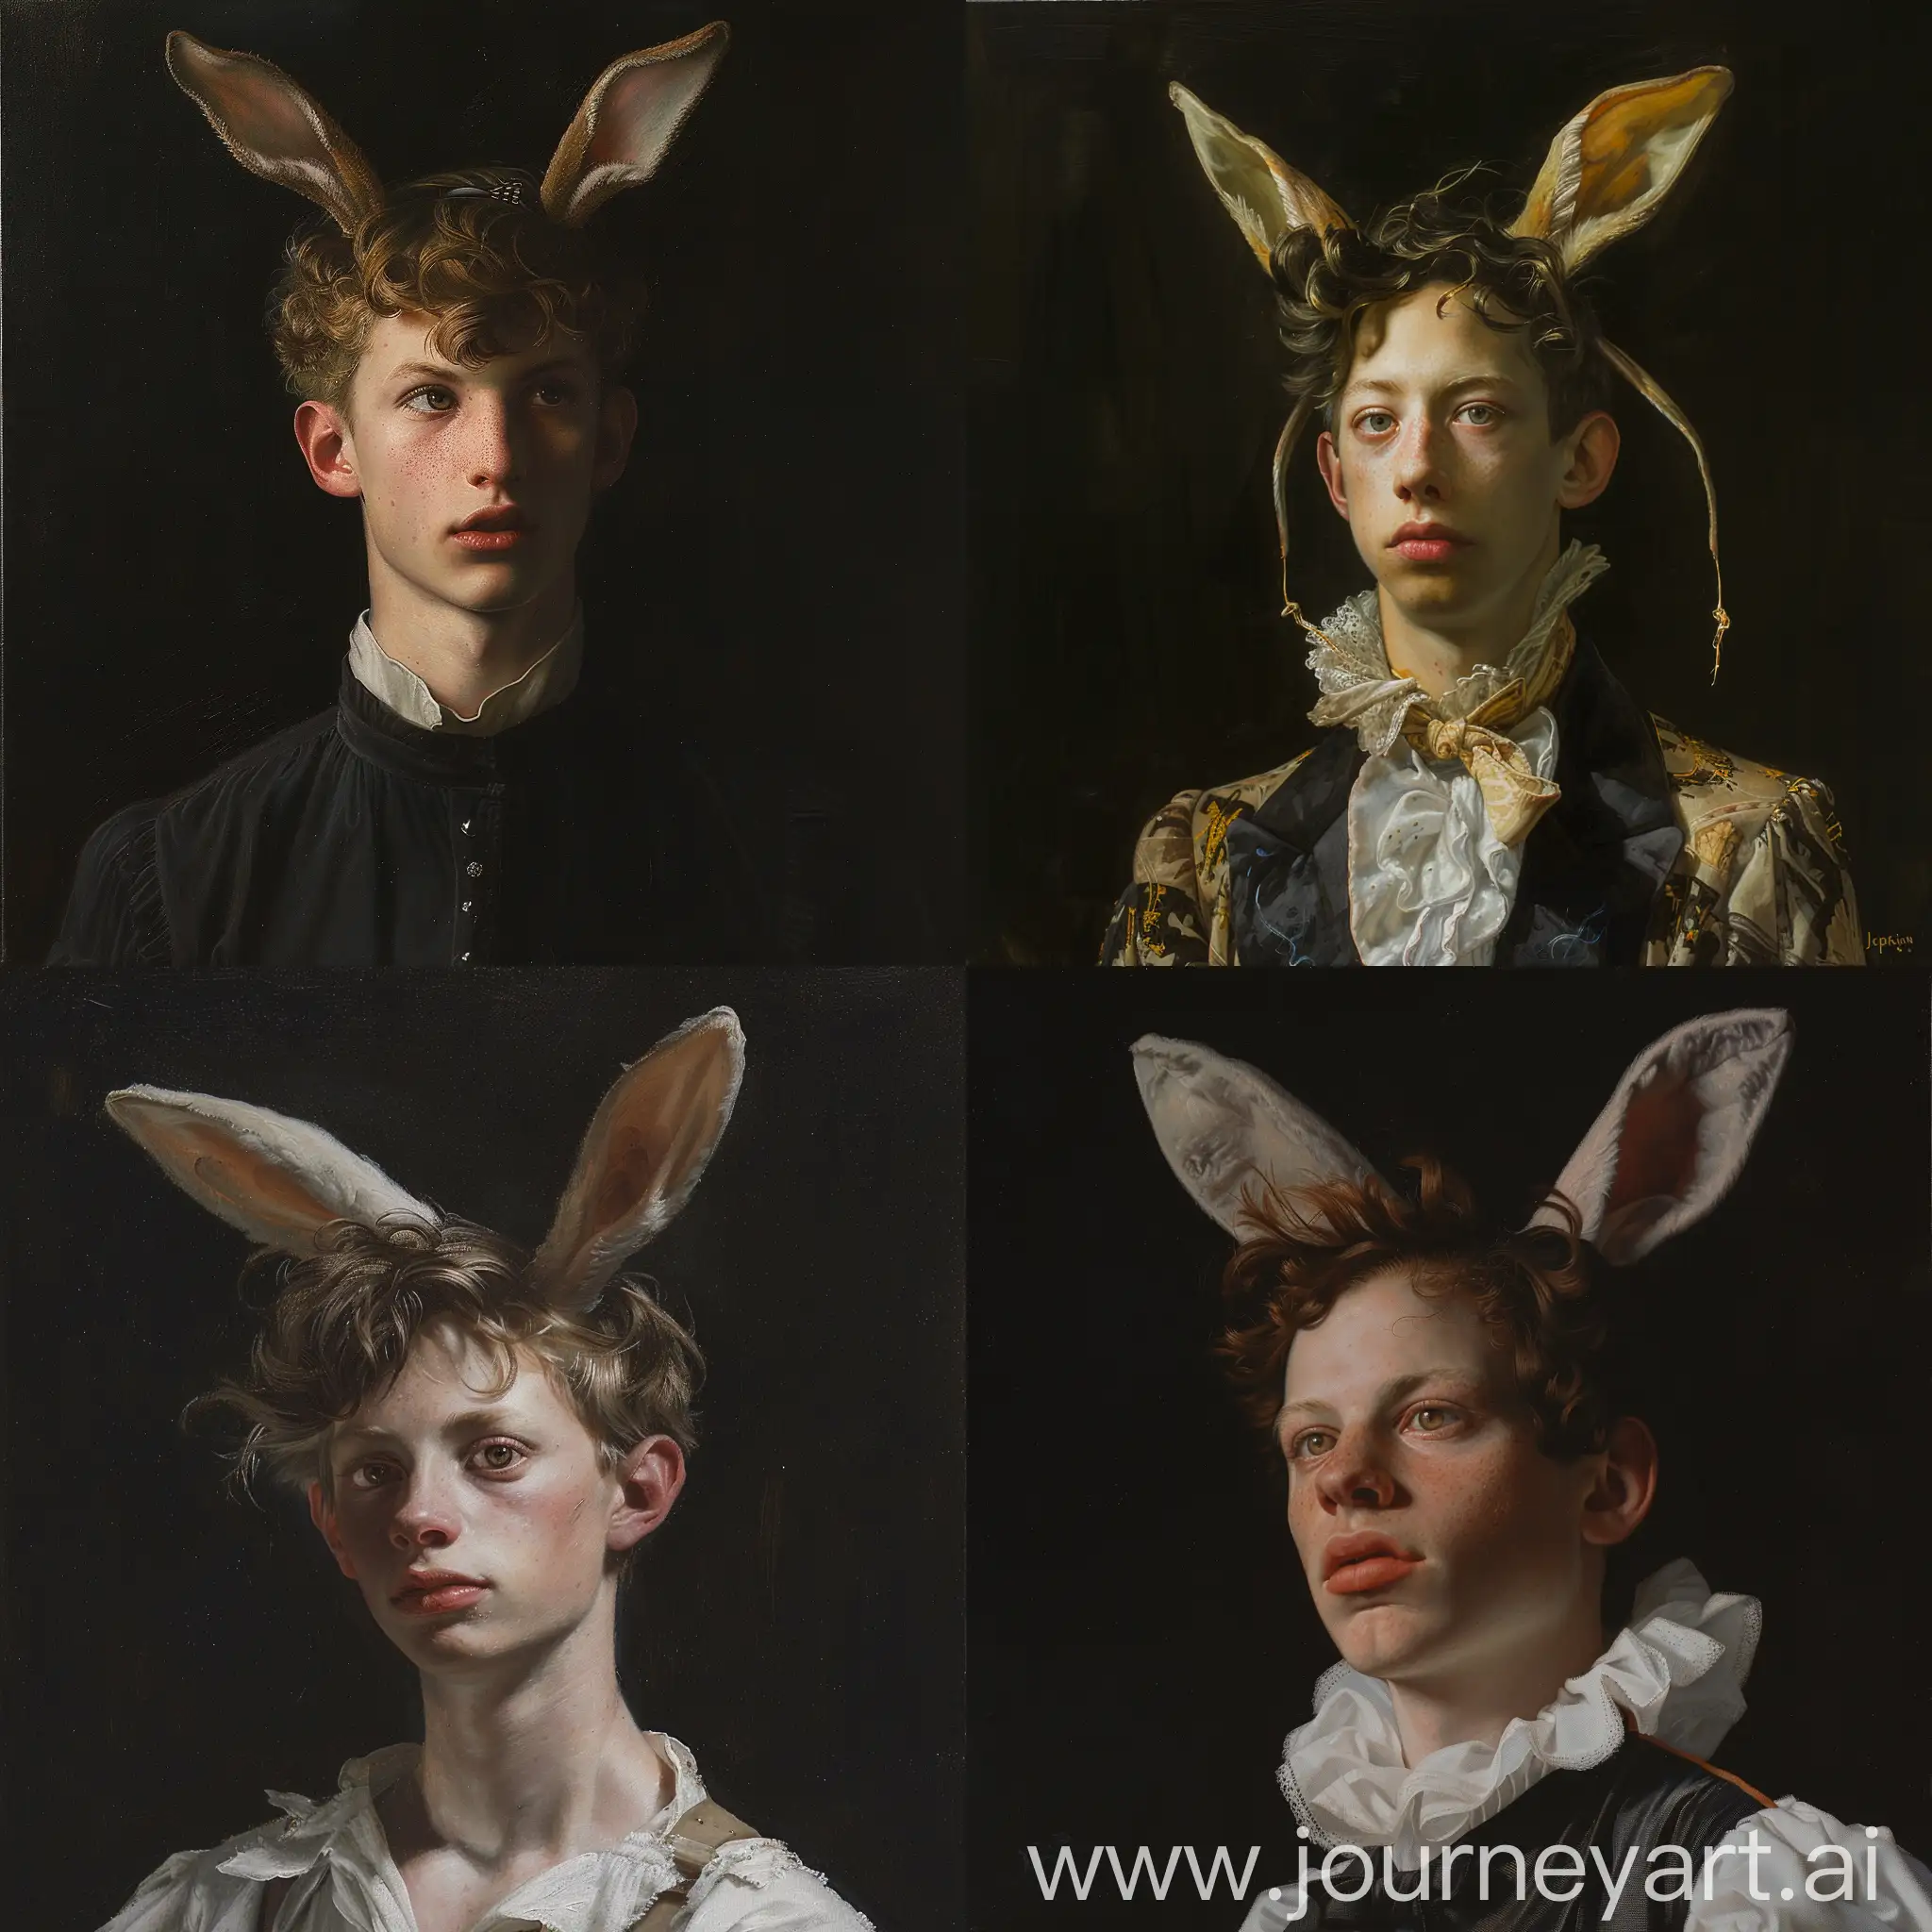 Realistic-Portrait-Painting-of-a-Young-Man-with-Rabbit-Ears-on-Black-Background